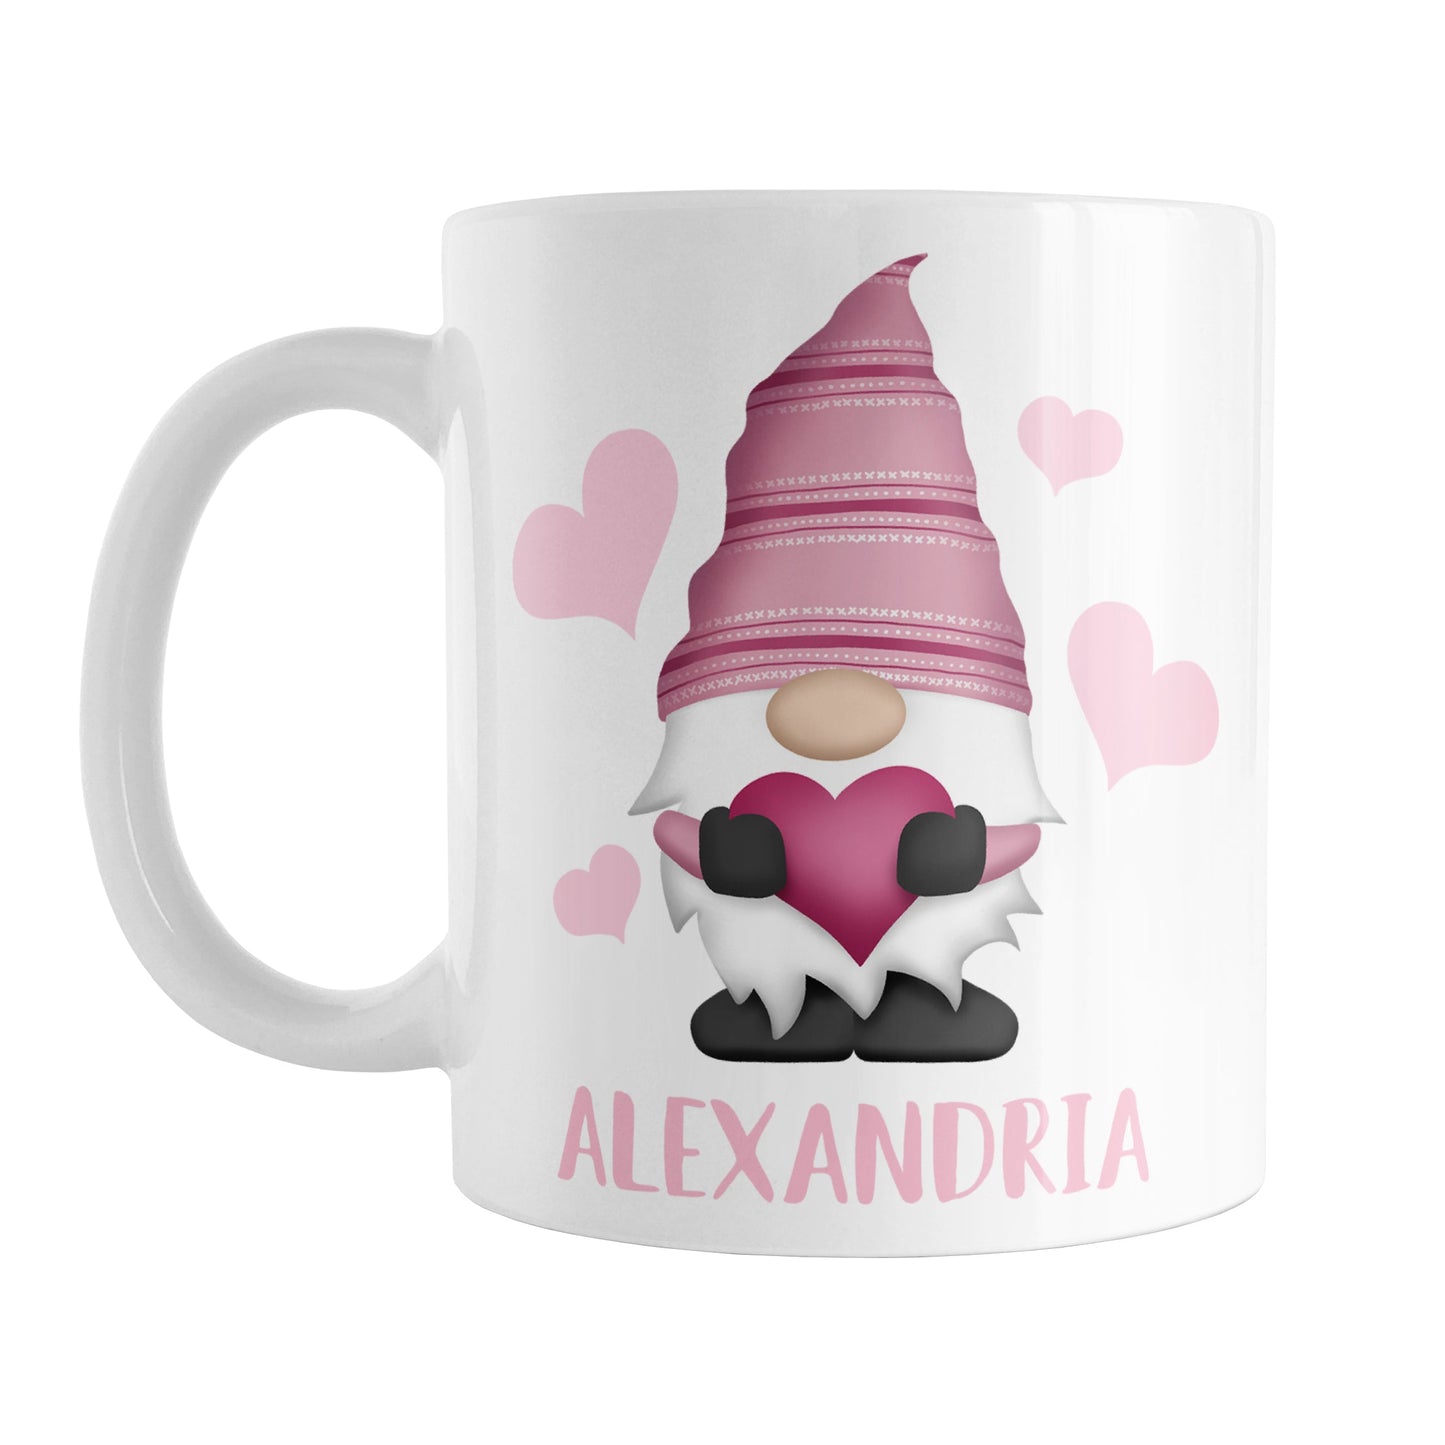 Personalized Pink Heart Gnome Mug (11oz) at Amy's Coffee Mugs. A ceramic coffee mug designed with an illustration of an adorable gnome with a pink pointed hat, holding a big pink heart, with light pink hearts around it. Below the gnome is your personalized name custom printed in a cute pink font. This charming gnome and personalized name are printed on both sides of the mug.